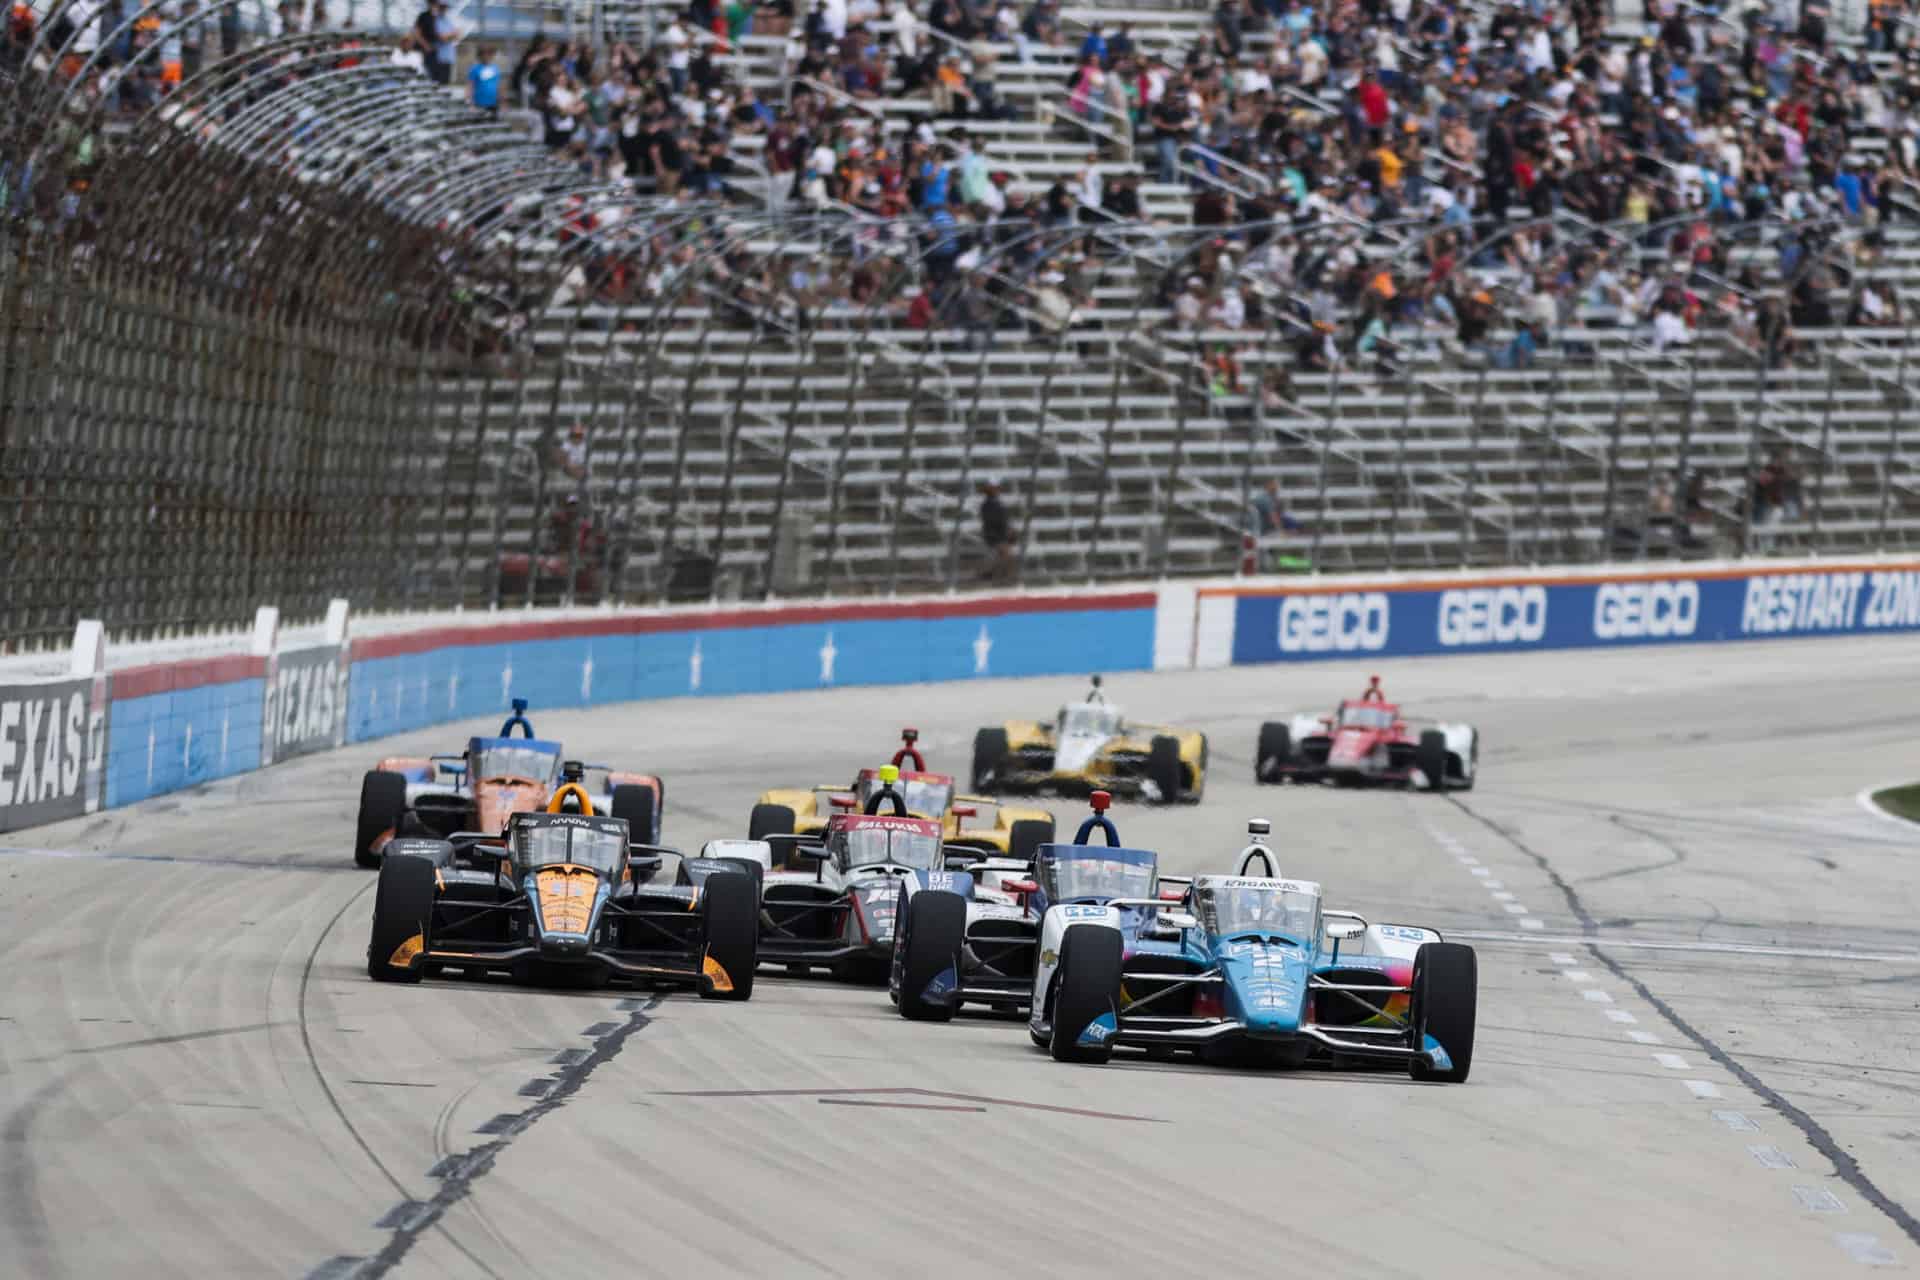 Josef newgarden leads during a late race restart at texas motor speedway in the 2023 ppg 375, en route to his first victory of the season. Photo by nigel kinrade photography.